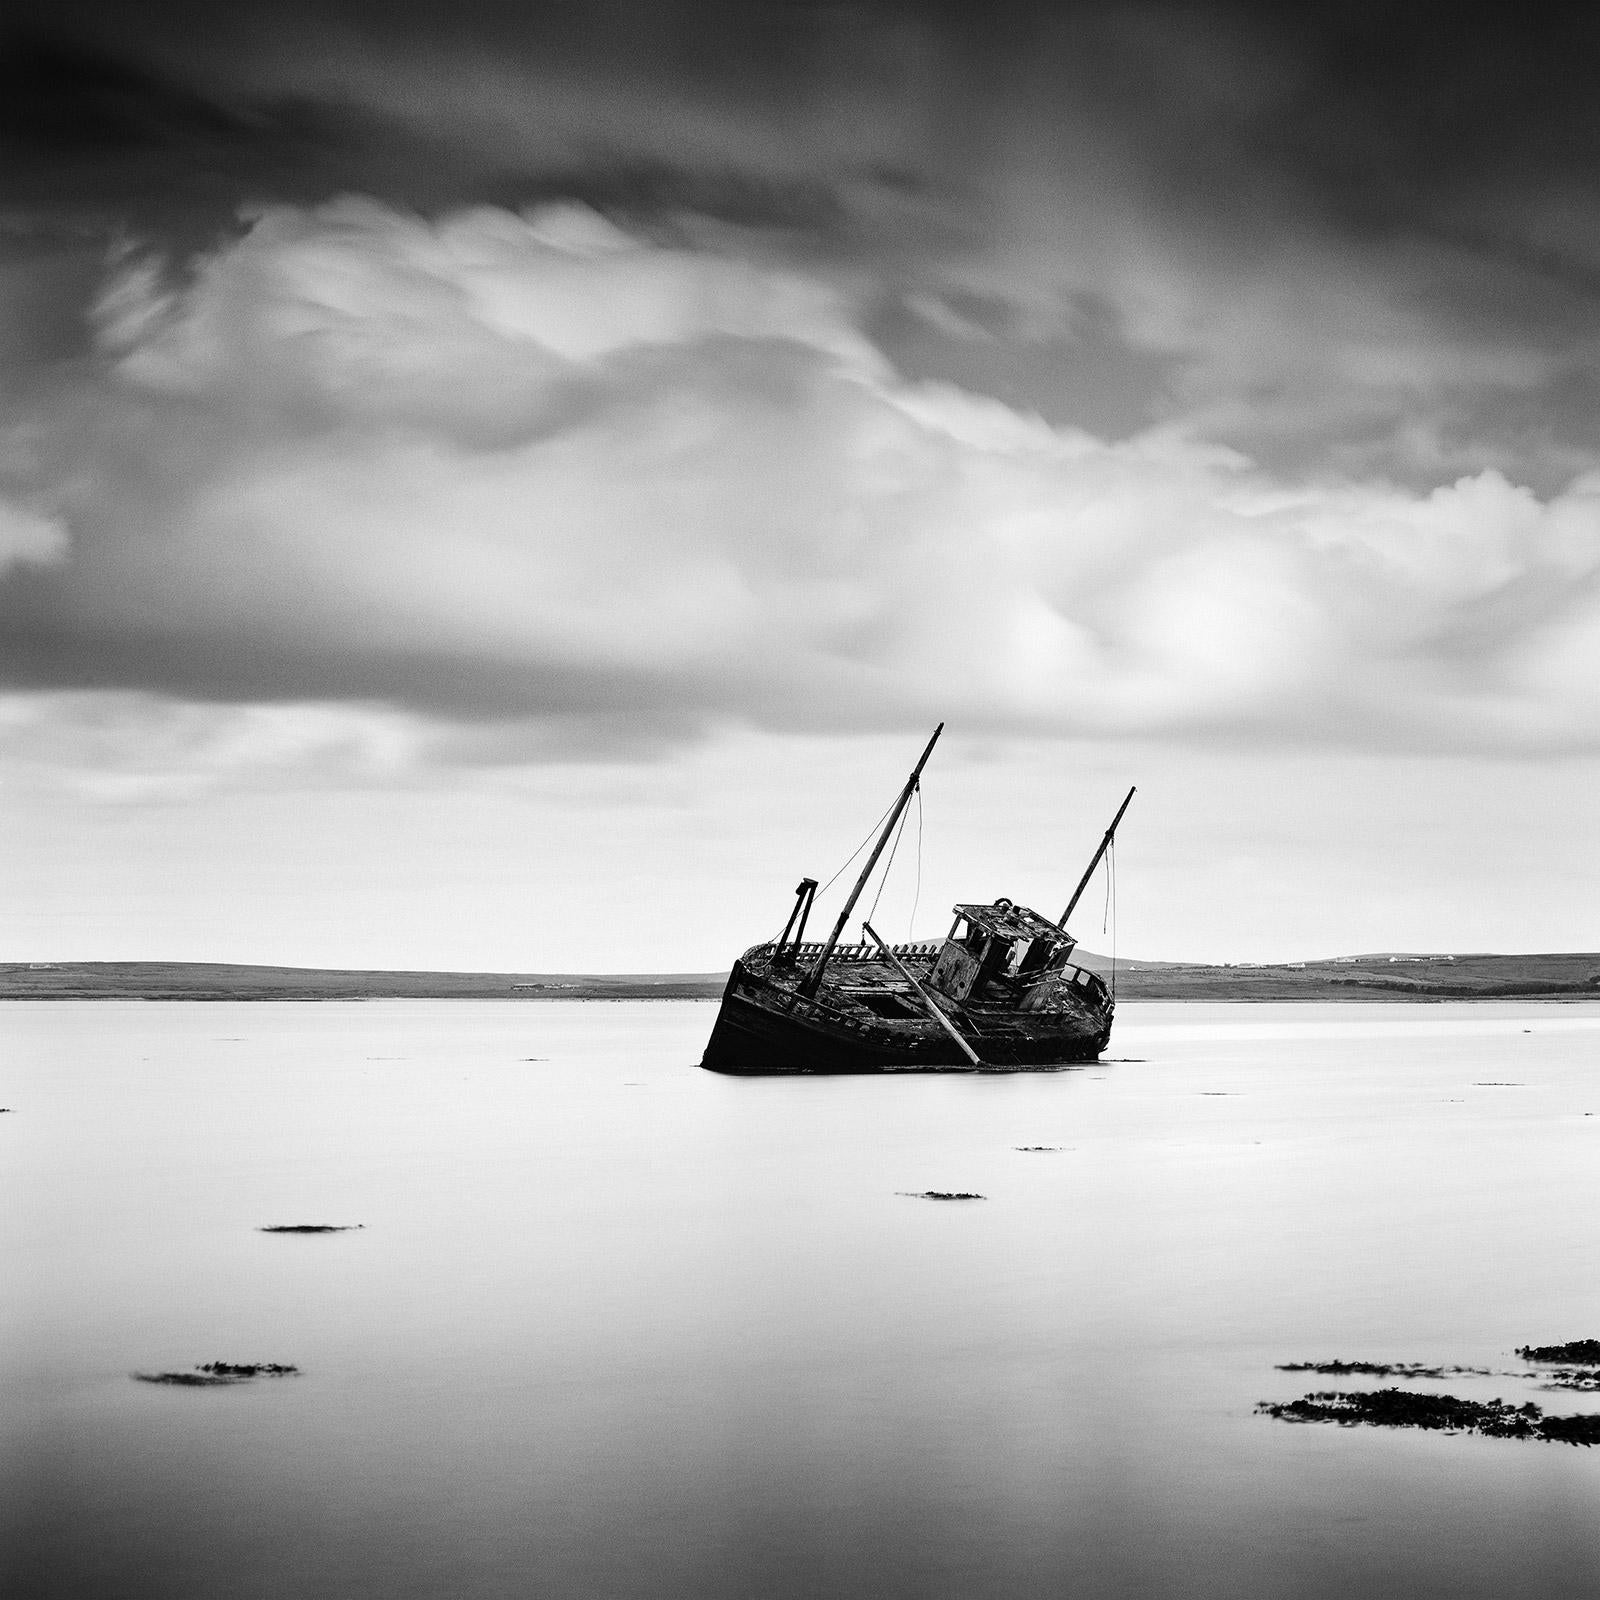 Gerald Berghammer Black and White Photograph - Stranded fishing Boat, beach, Ireland, black and white photography, landscape